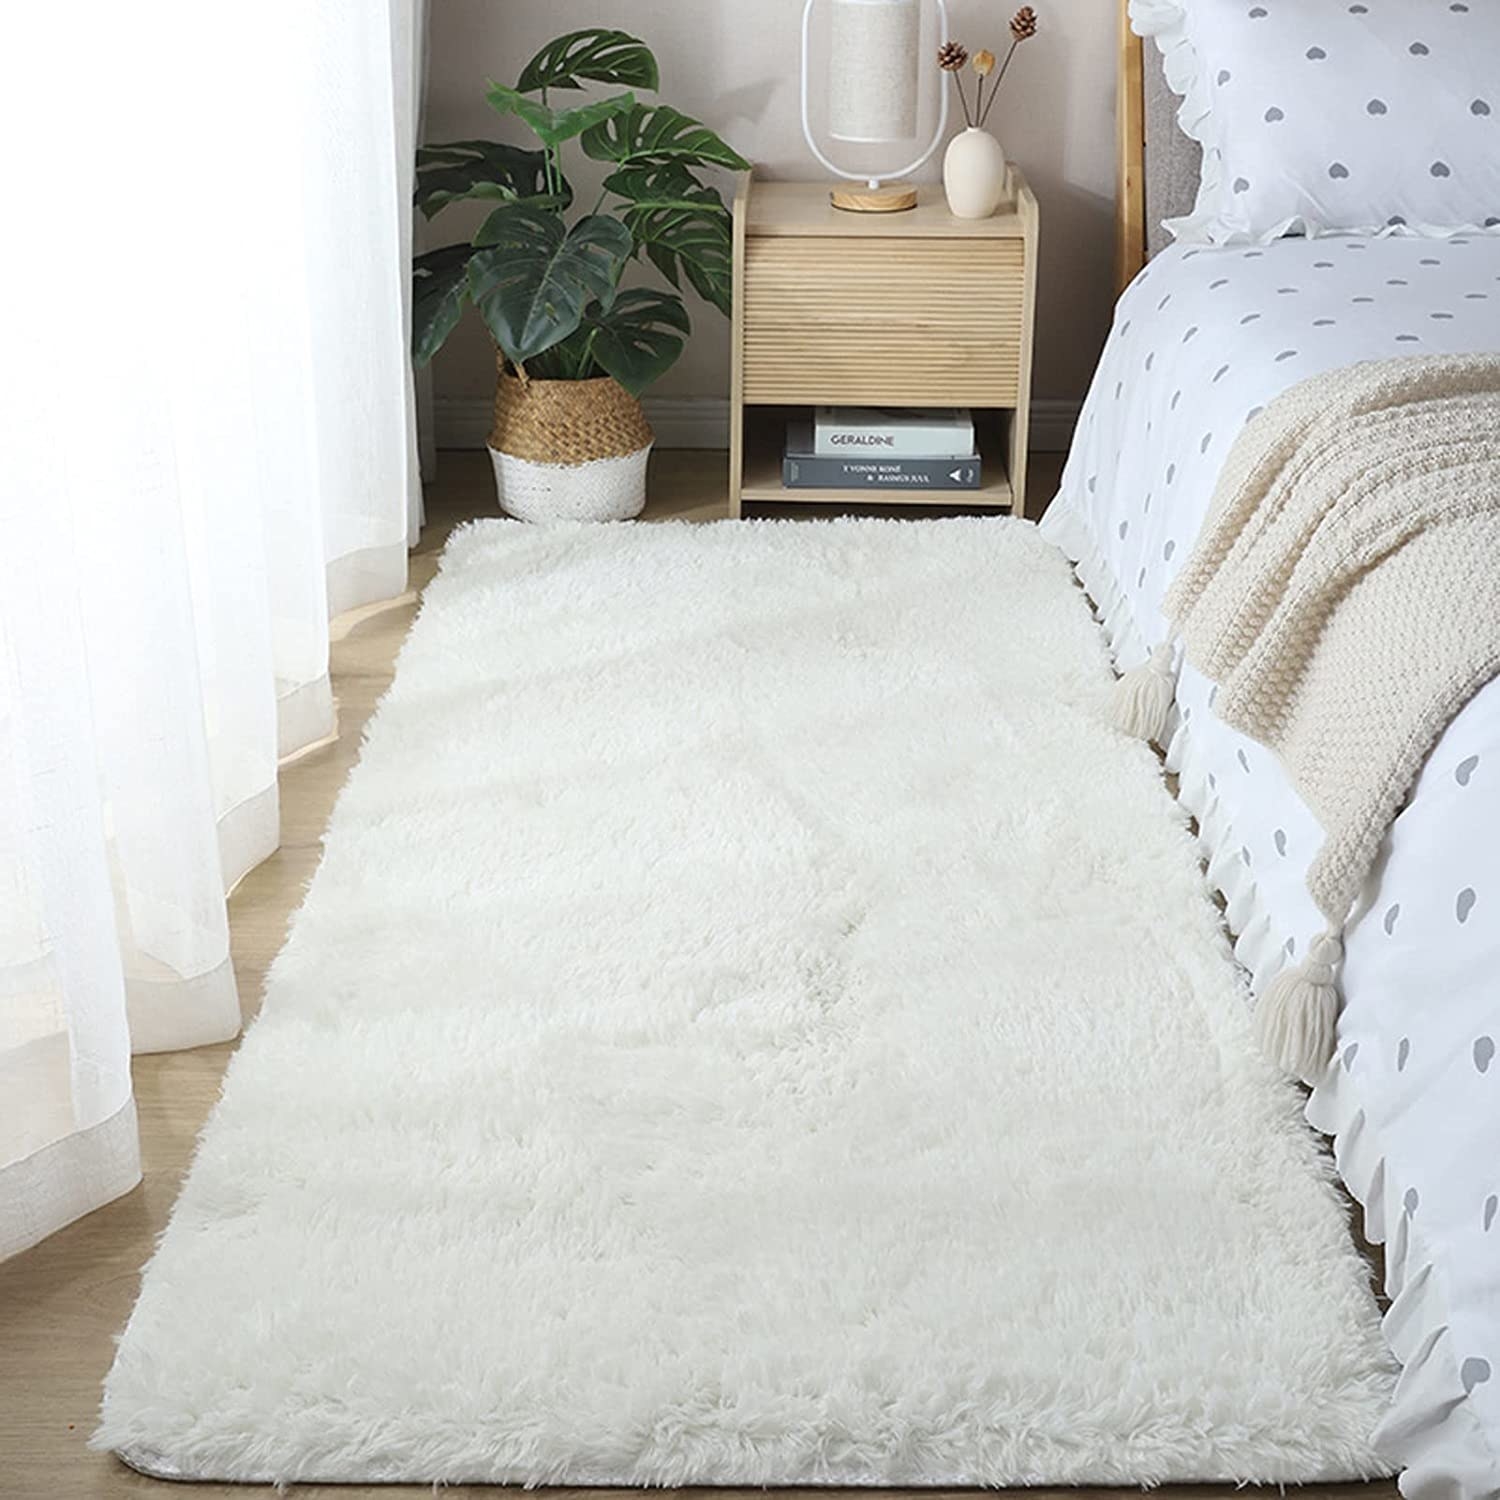 the rug in a bedroom beside a bed and nightstand